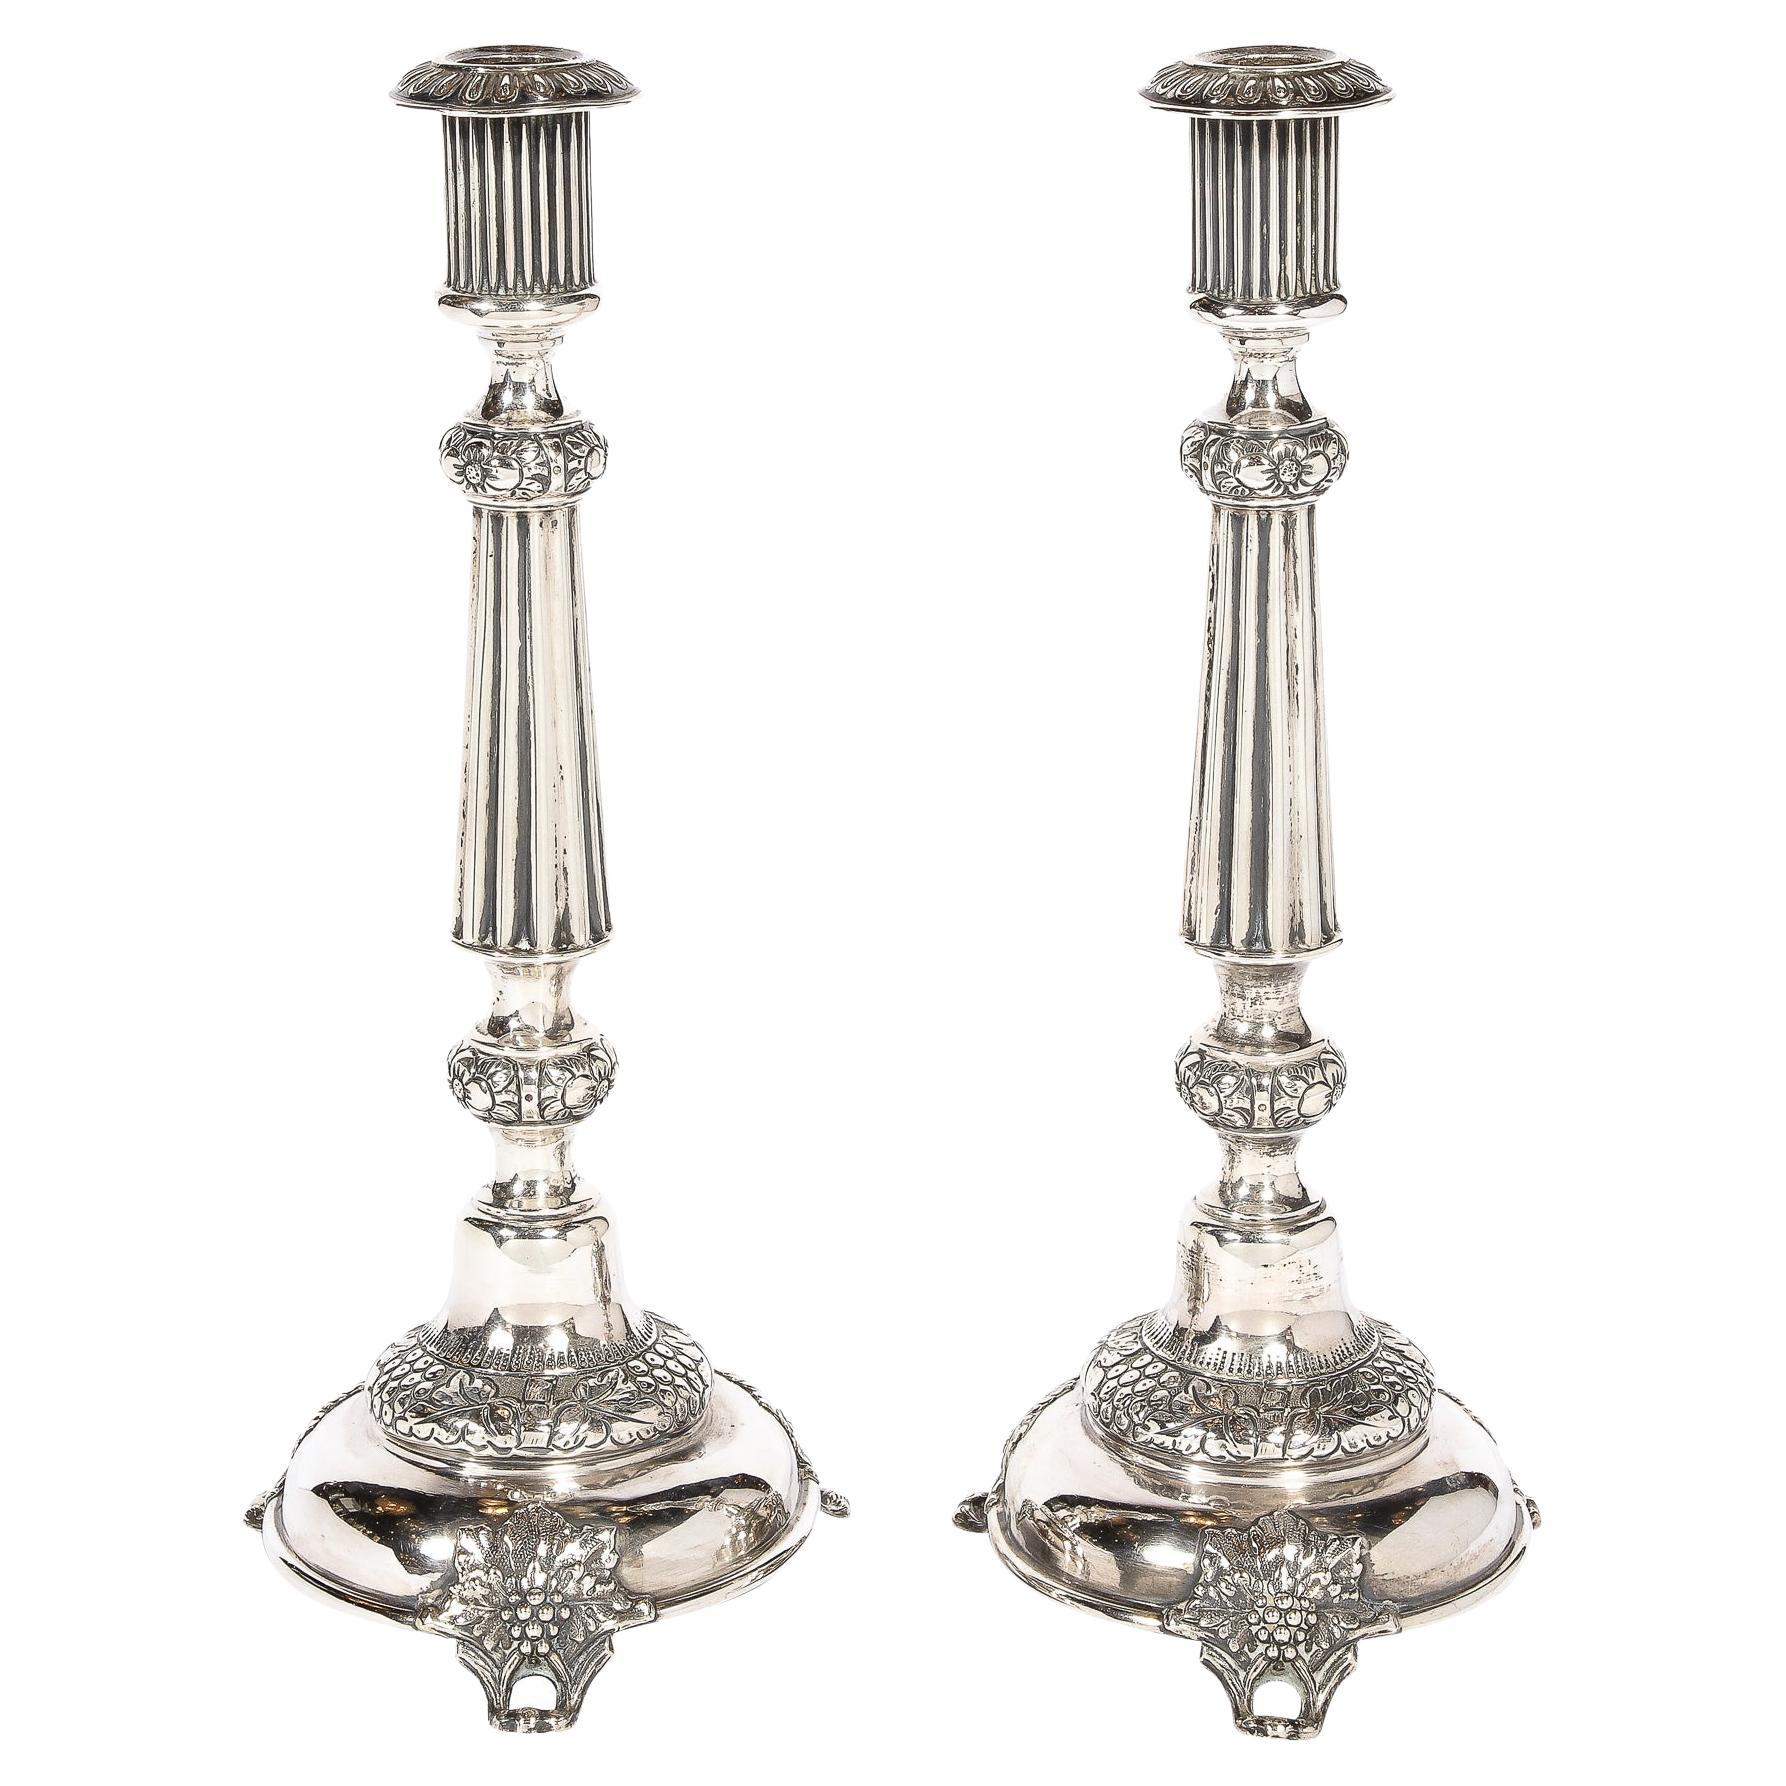 Pair of Antique Sterling Silver Sabbath Candle Holders Signed J. Ehrlich